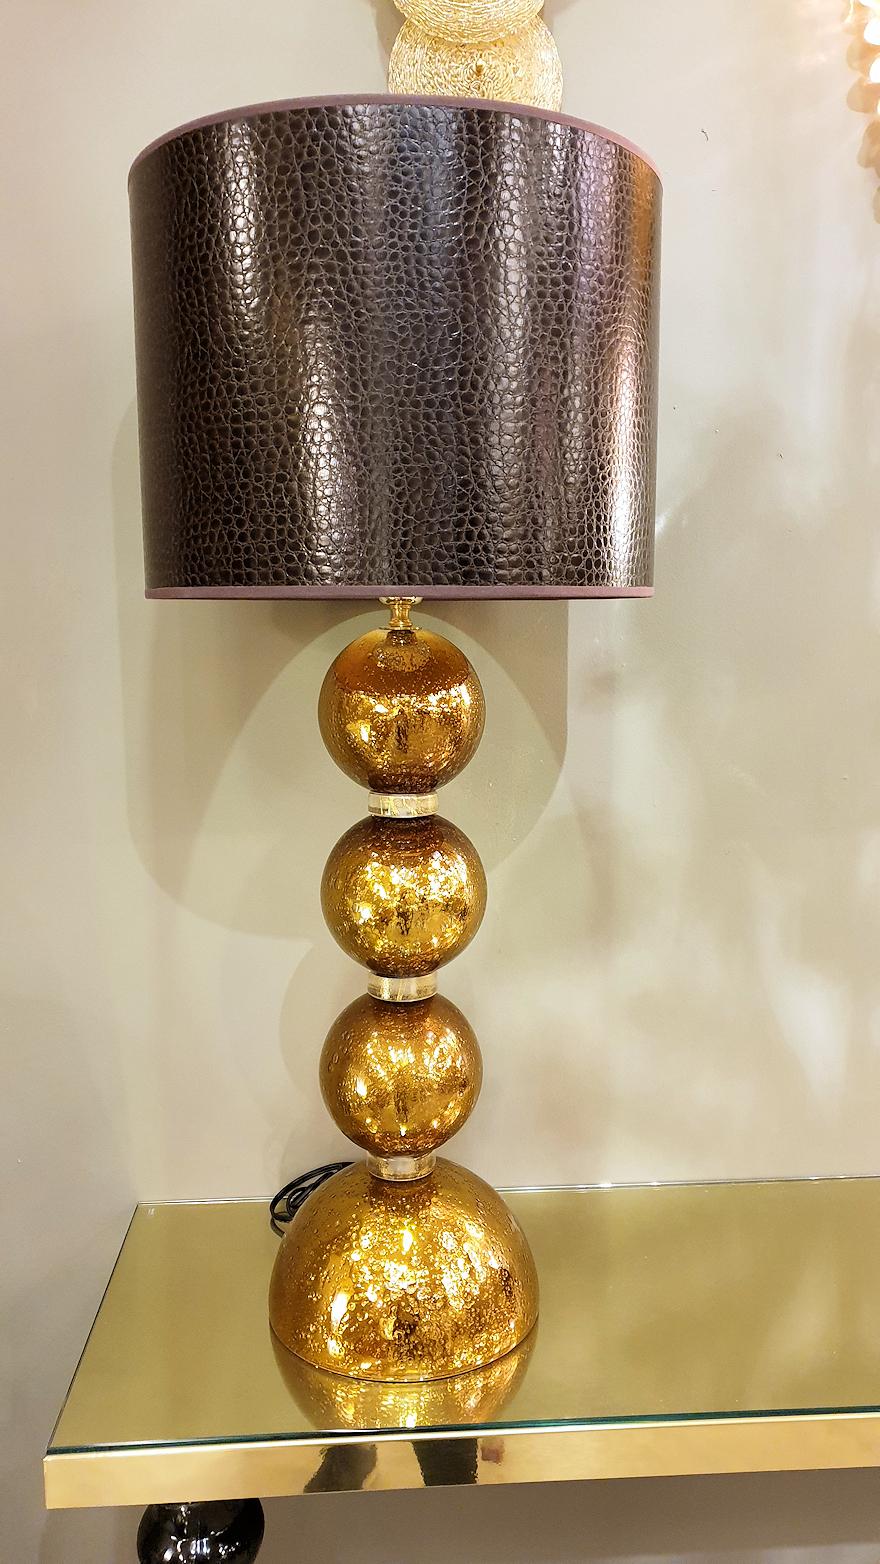 Hand-Crafted Large Pair Gold Murano Glass Table Lamps, Mid-Century Modern, Mazzega Style 1970